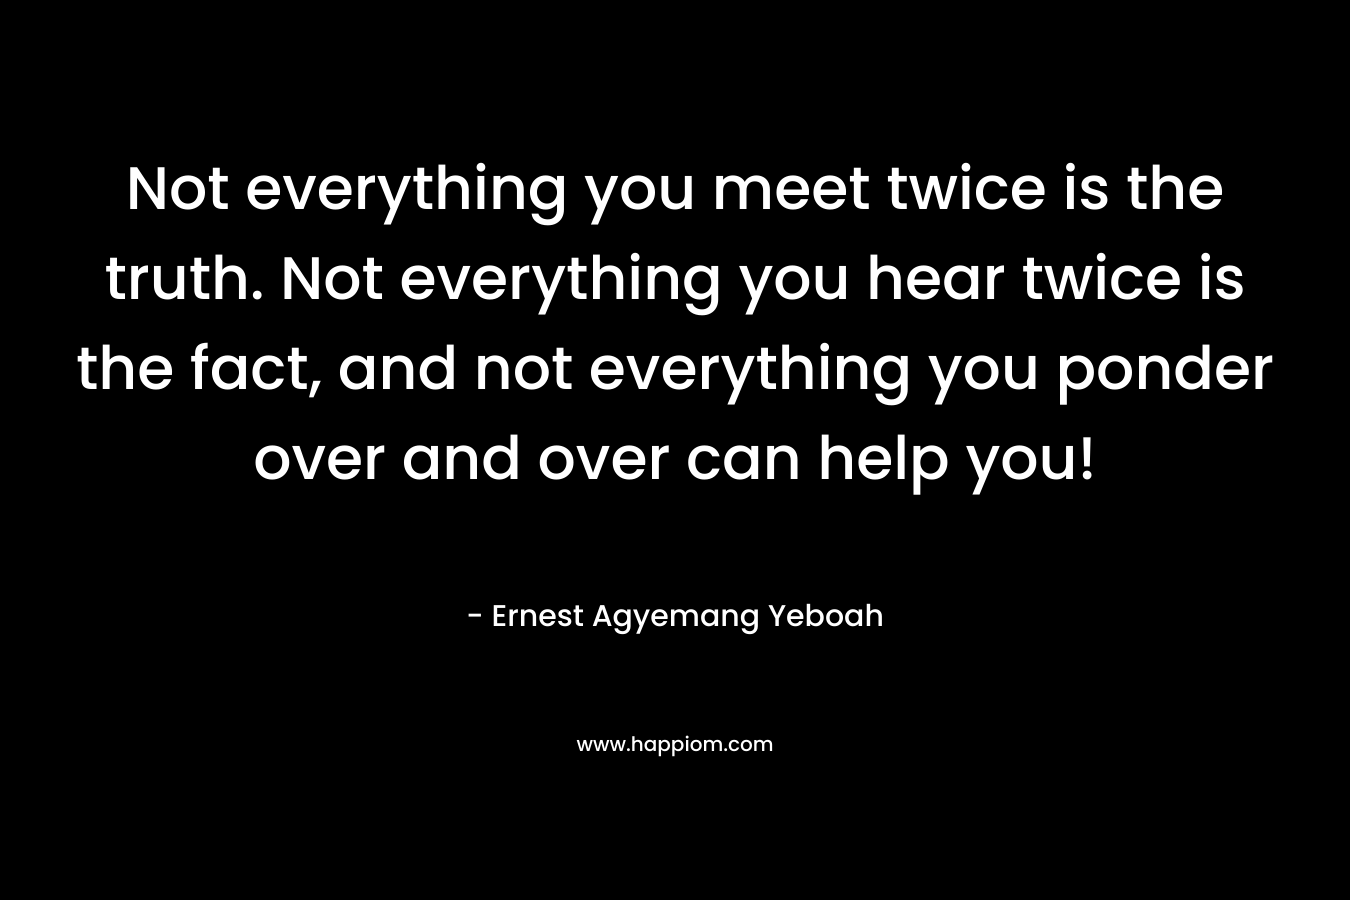 Not everything you meet twice is the truth. Not everything you hear twice is the fact, and not everything you ponder over and over can help you!